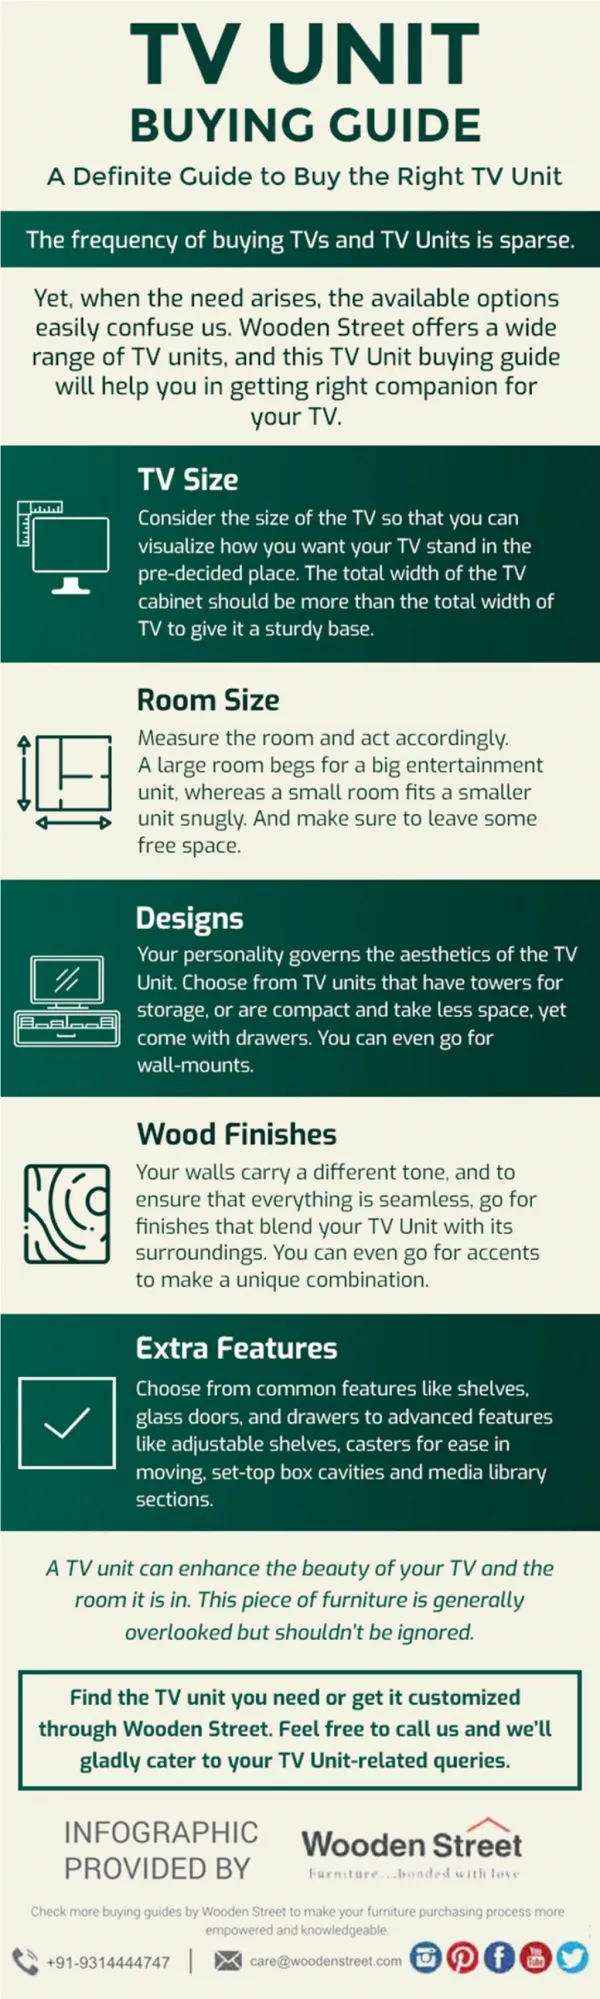 A Definite Guide to Buy The Right TV Unit